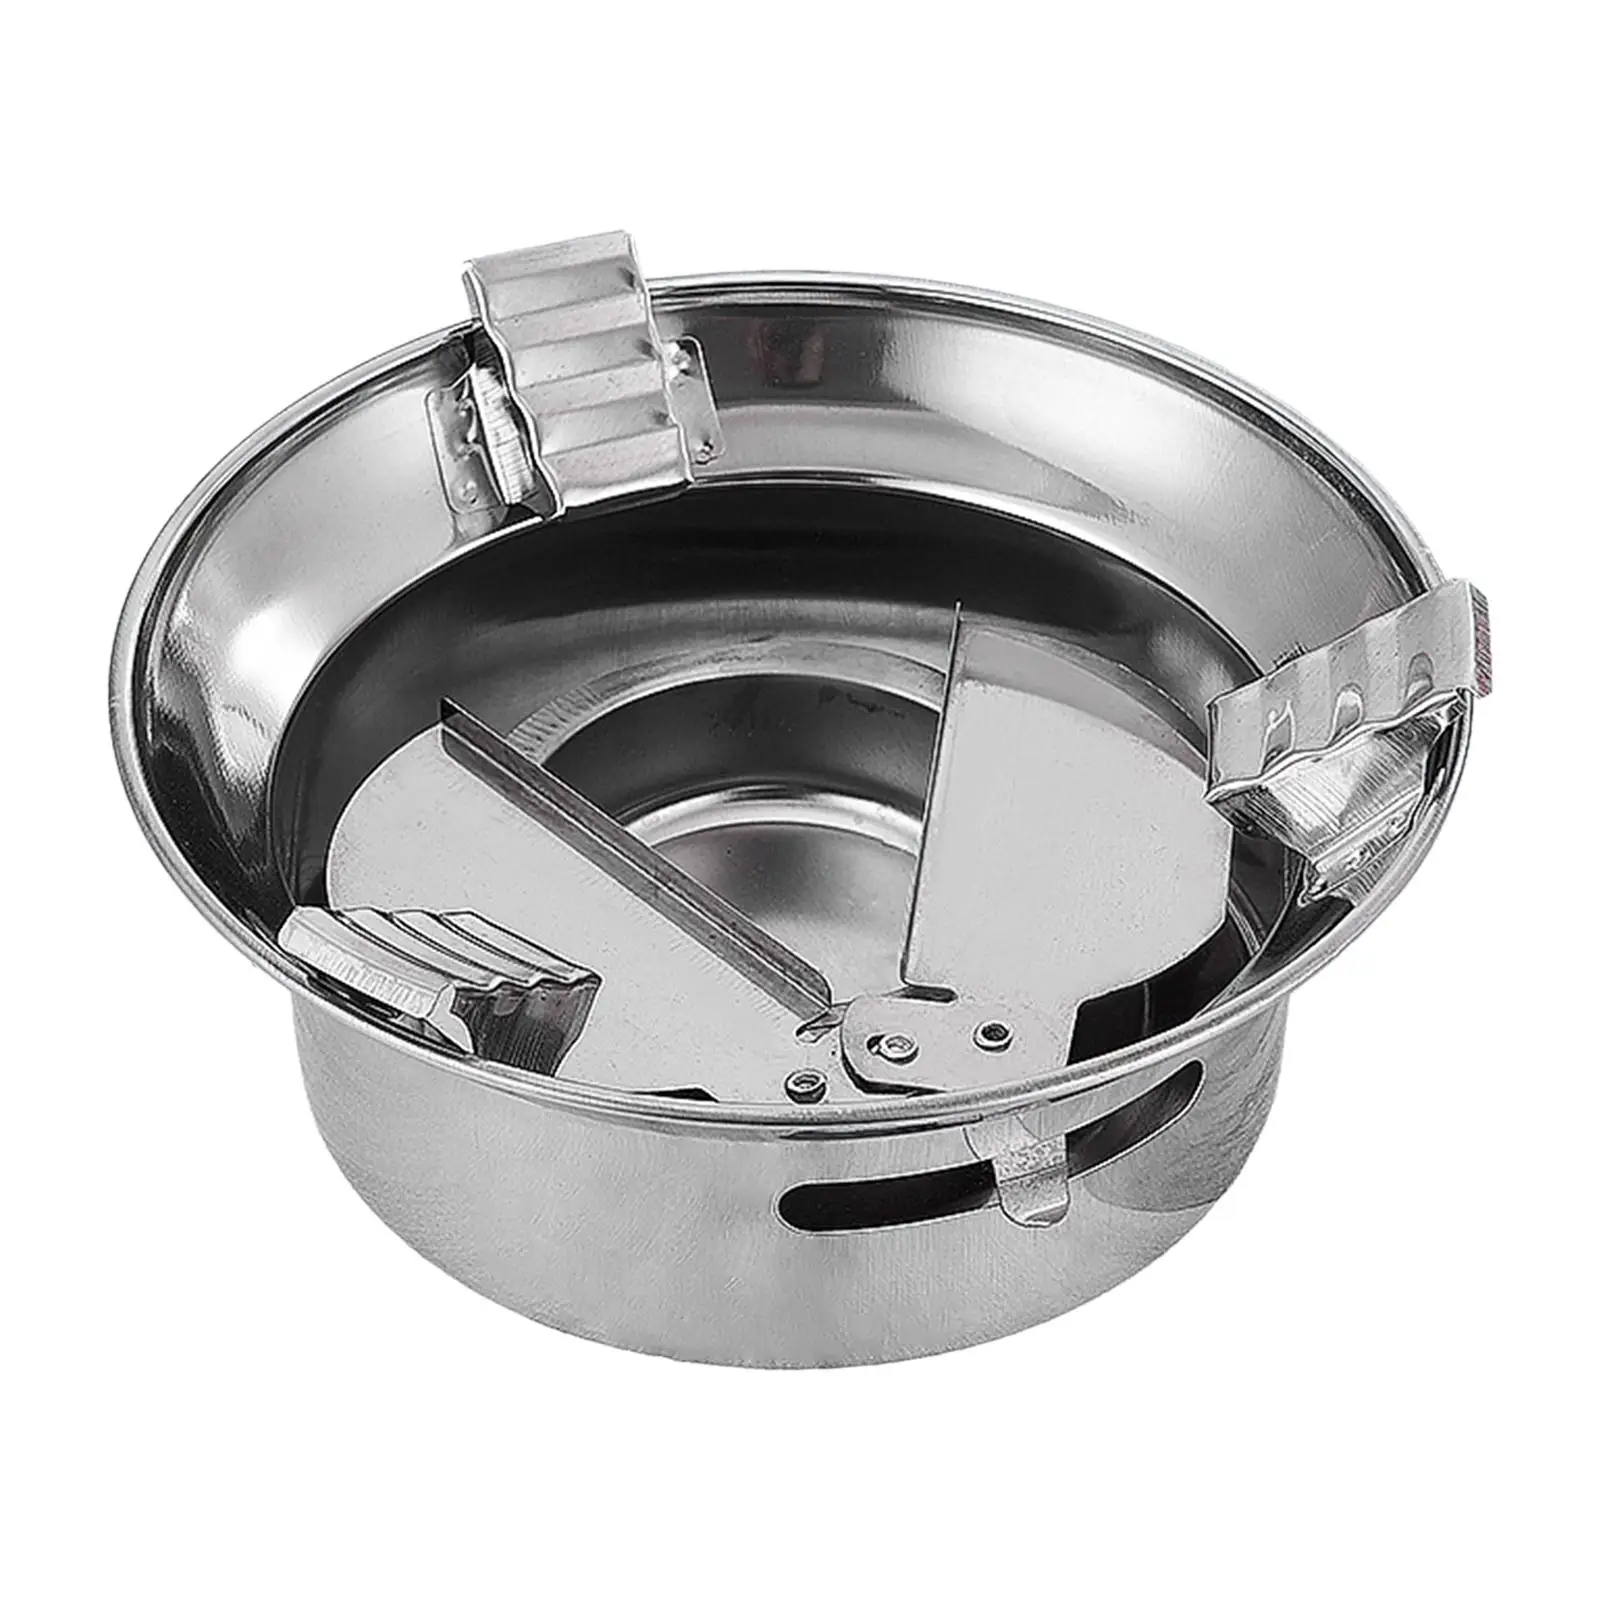 Round Portable Camping  Stainless Steel Lightweight Cookware Diameter 7.8inch Easily Adjust Fire Power Accessory Durable